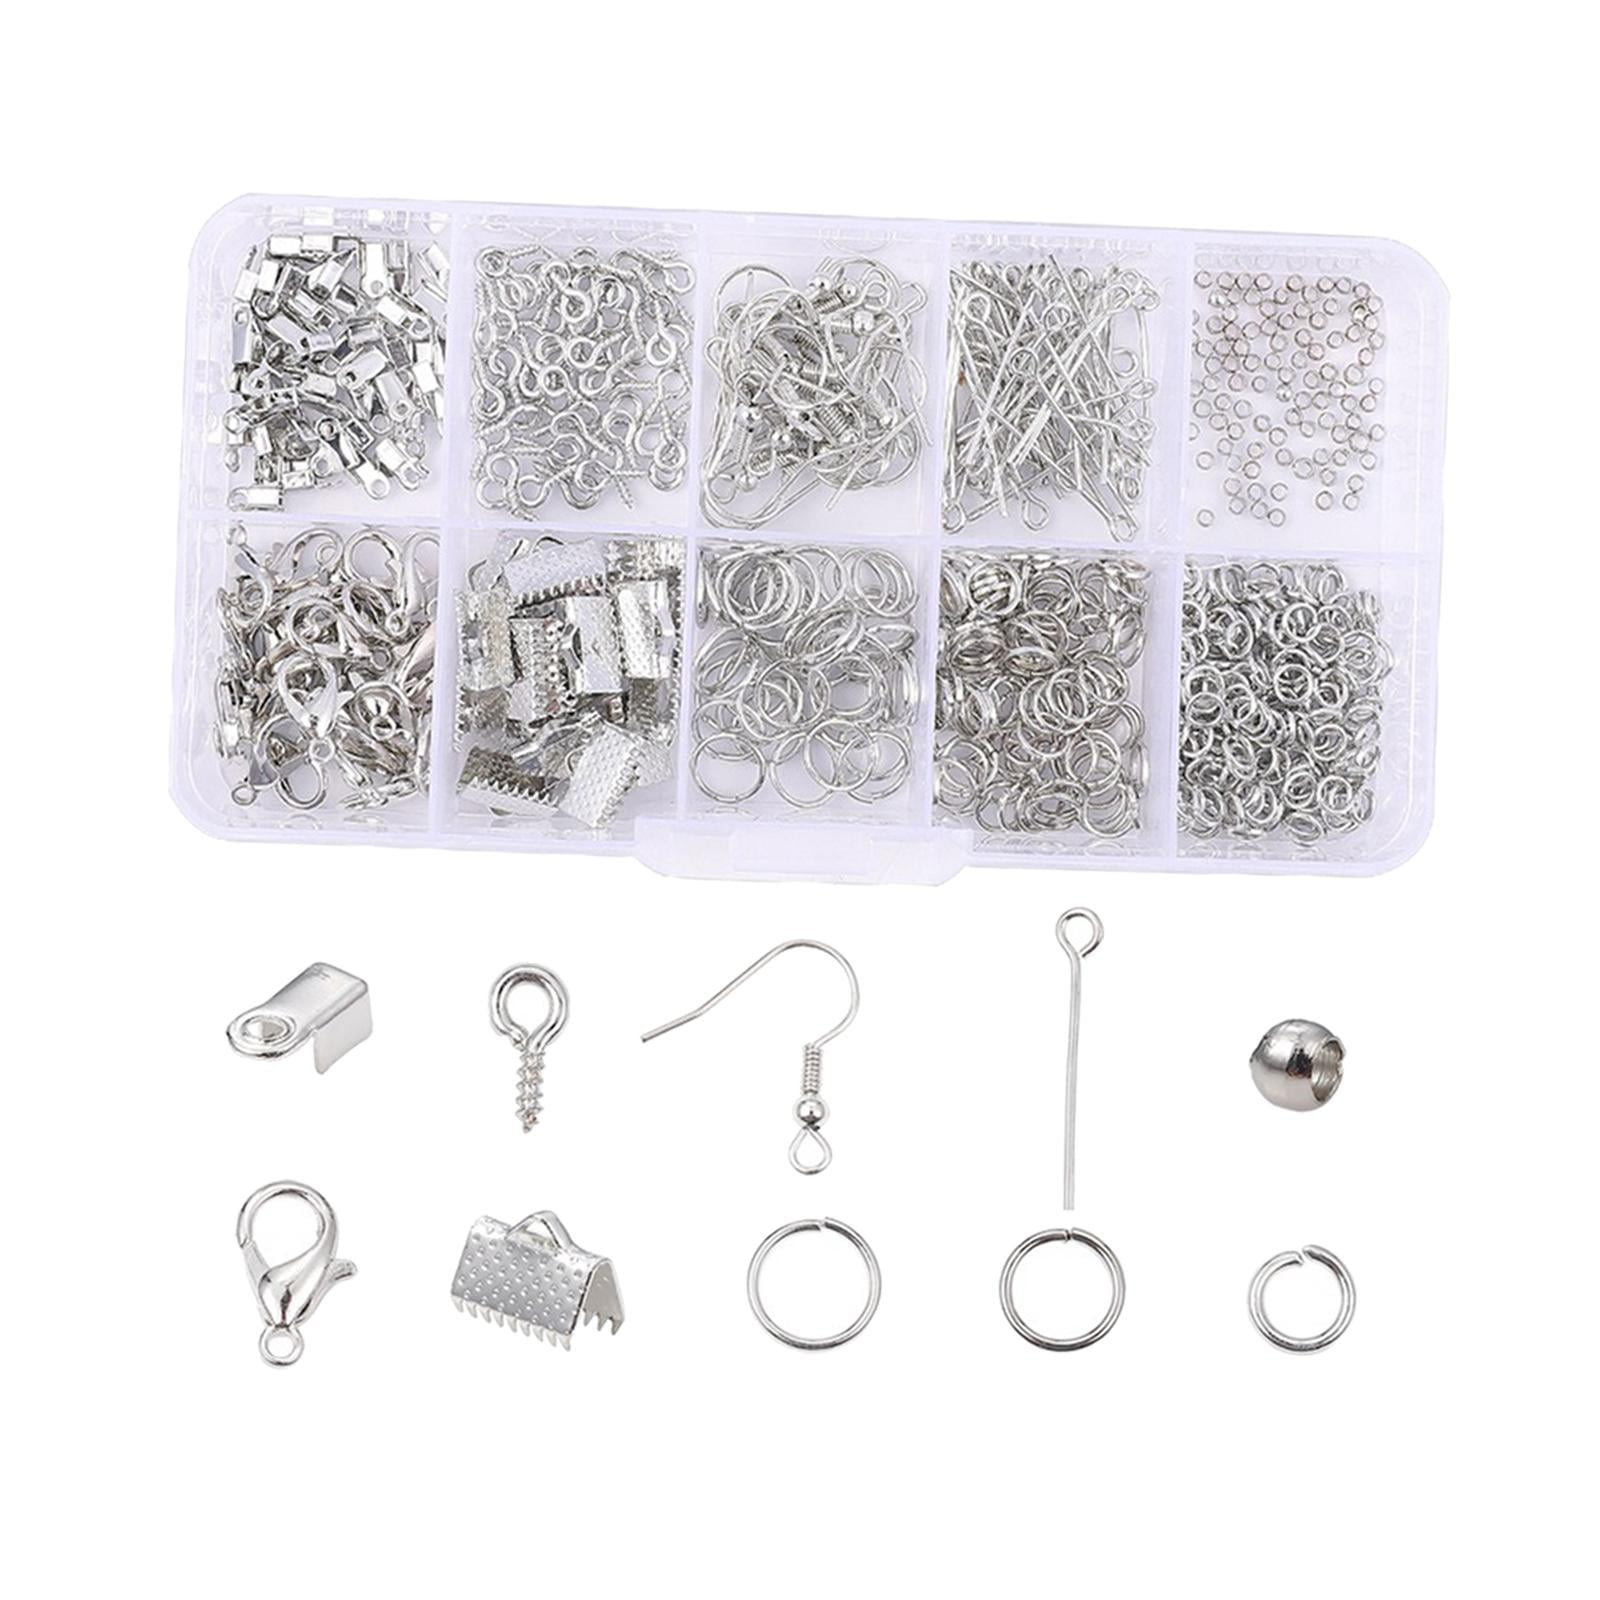 HUIANER Earring Making Supplies 1128PCS Earring Making Kit with 125pcs  Earring Hooks, 1000pcs Jump Rings and Jewelry Pliers for Jewelry Making